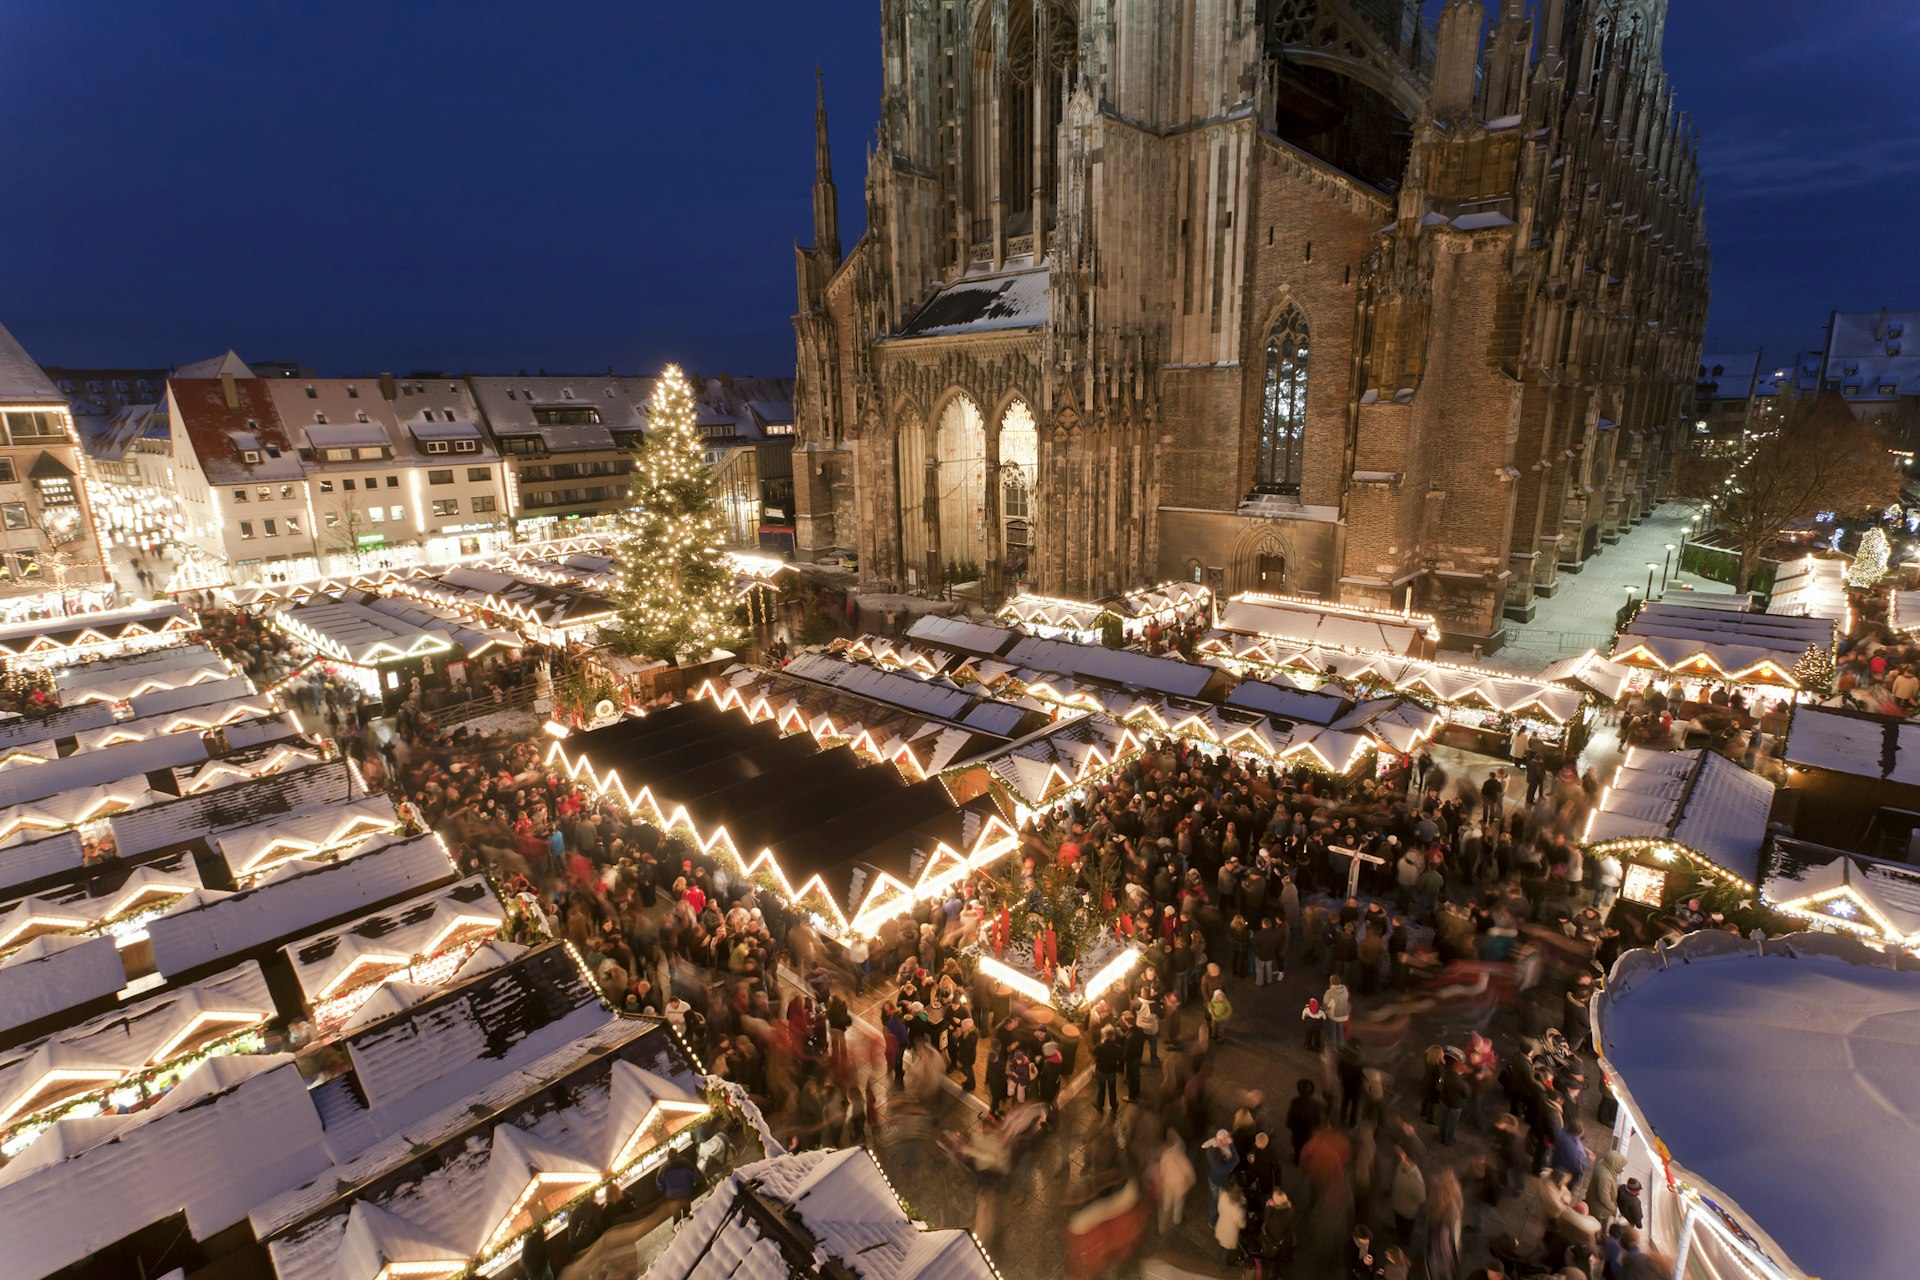 The Christmas market in Ulm, Germany, in front of the massive Gothic cathedral at nighttime